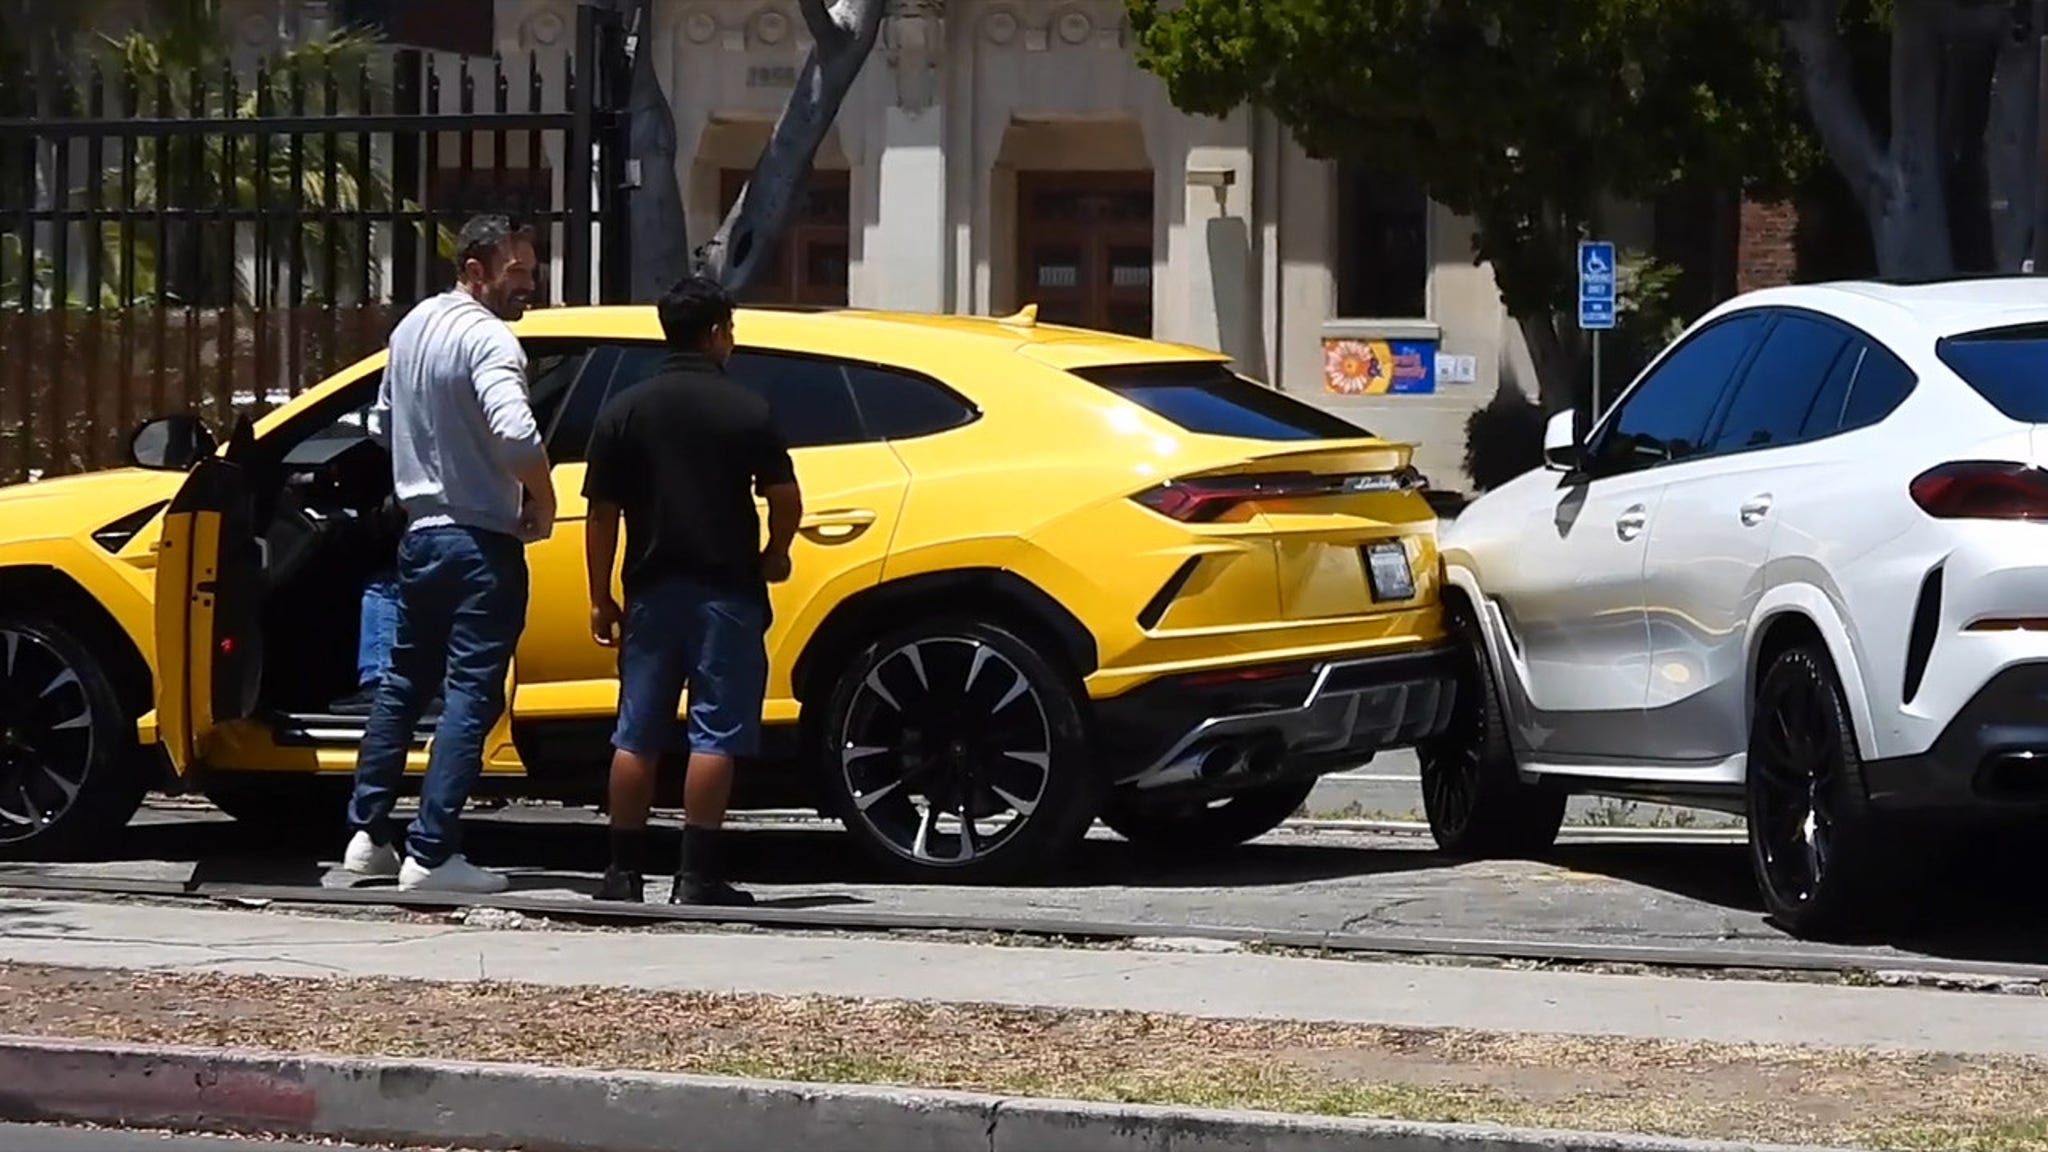 Ben Affleck's Car Gets Boxed In, Struggles To Pull Out Of Parking Spot In  Video